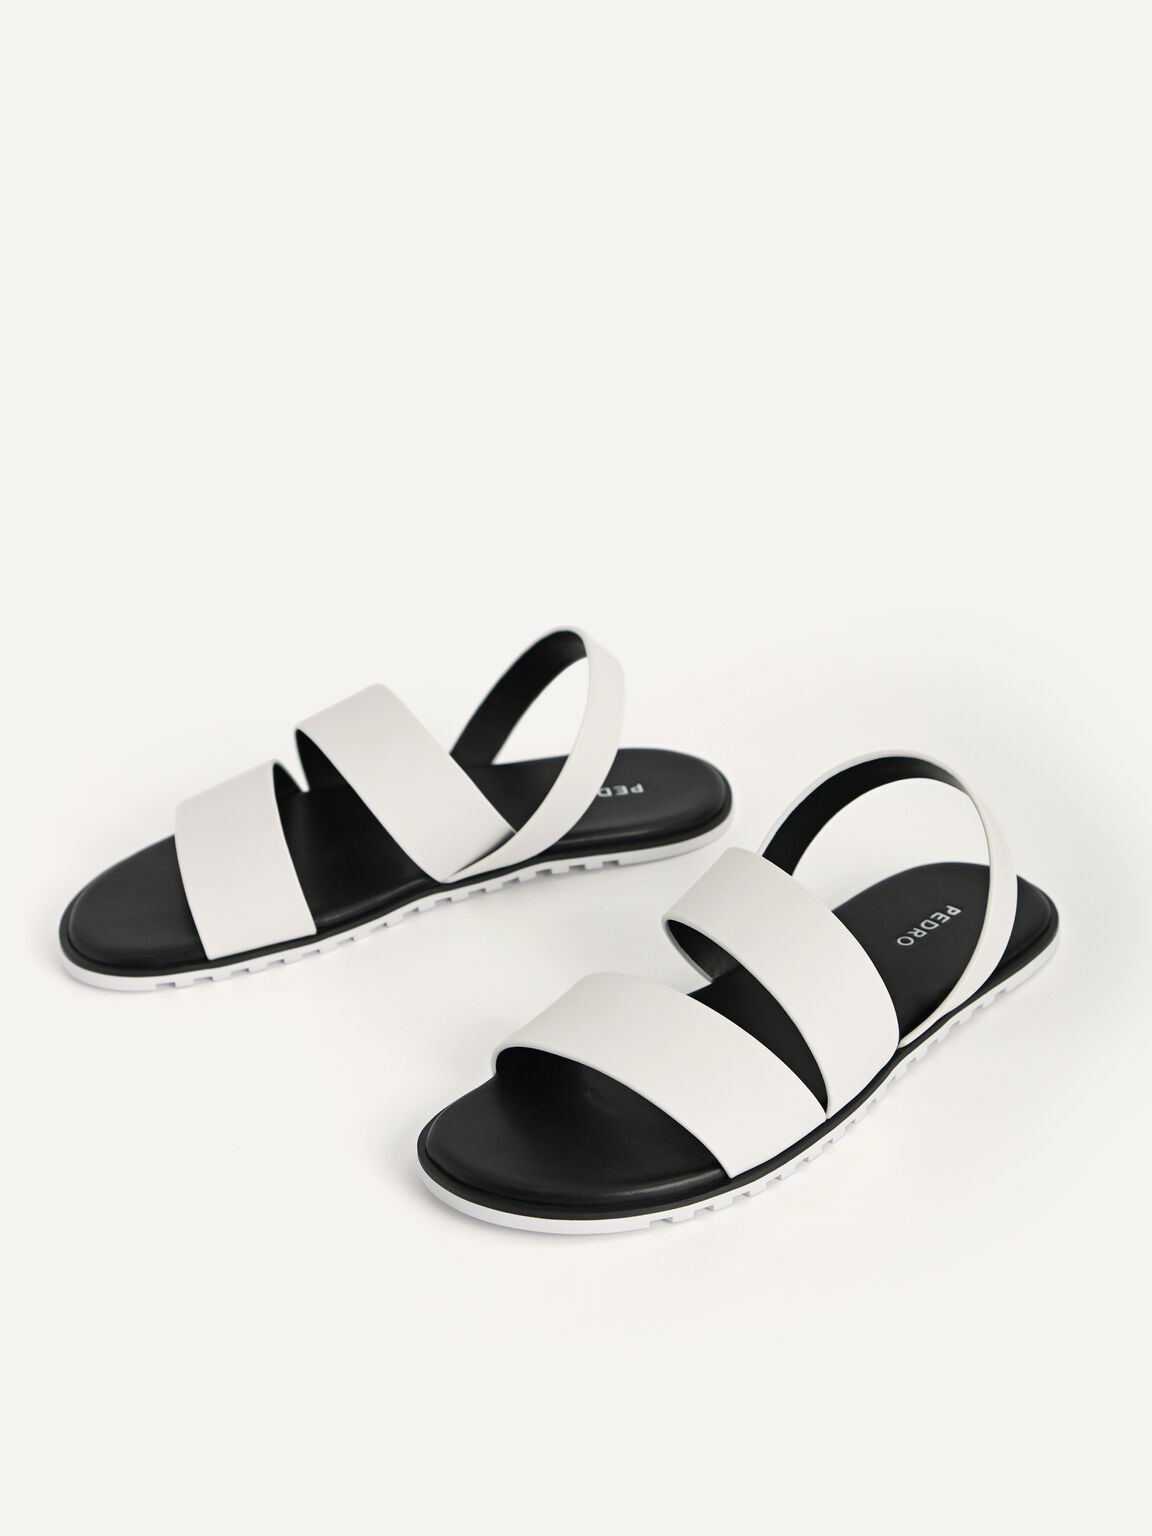 Double Strap Slingback Sandals, White